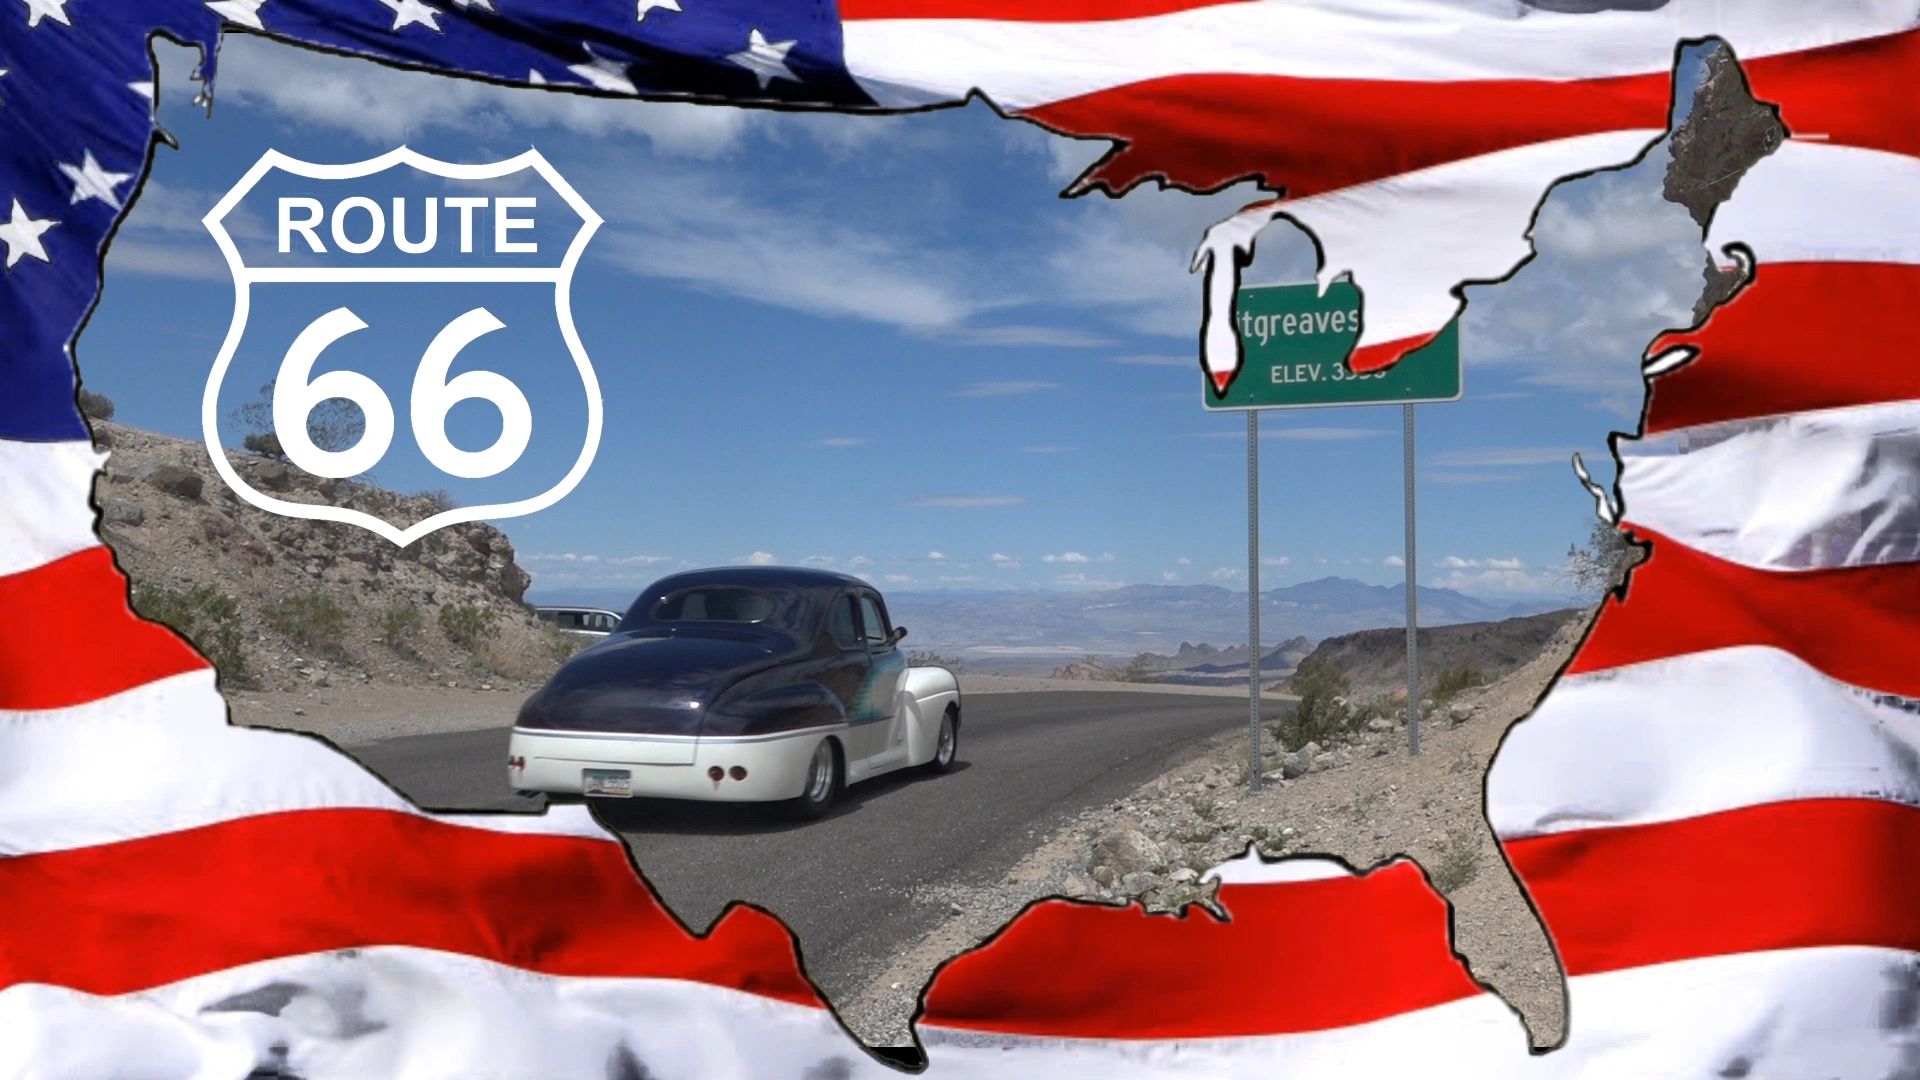 route 66 travel agency